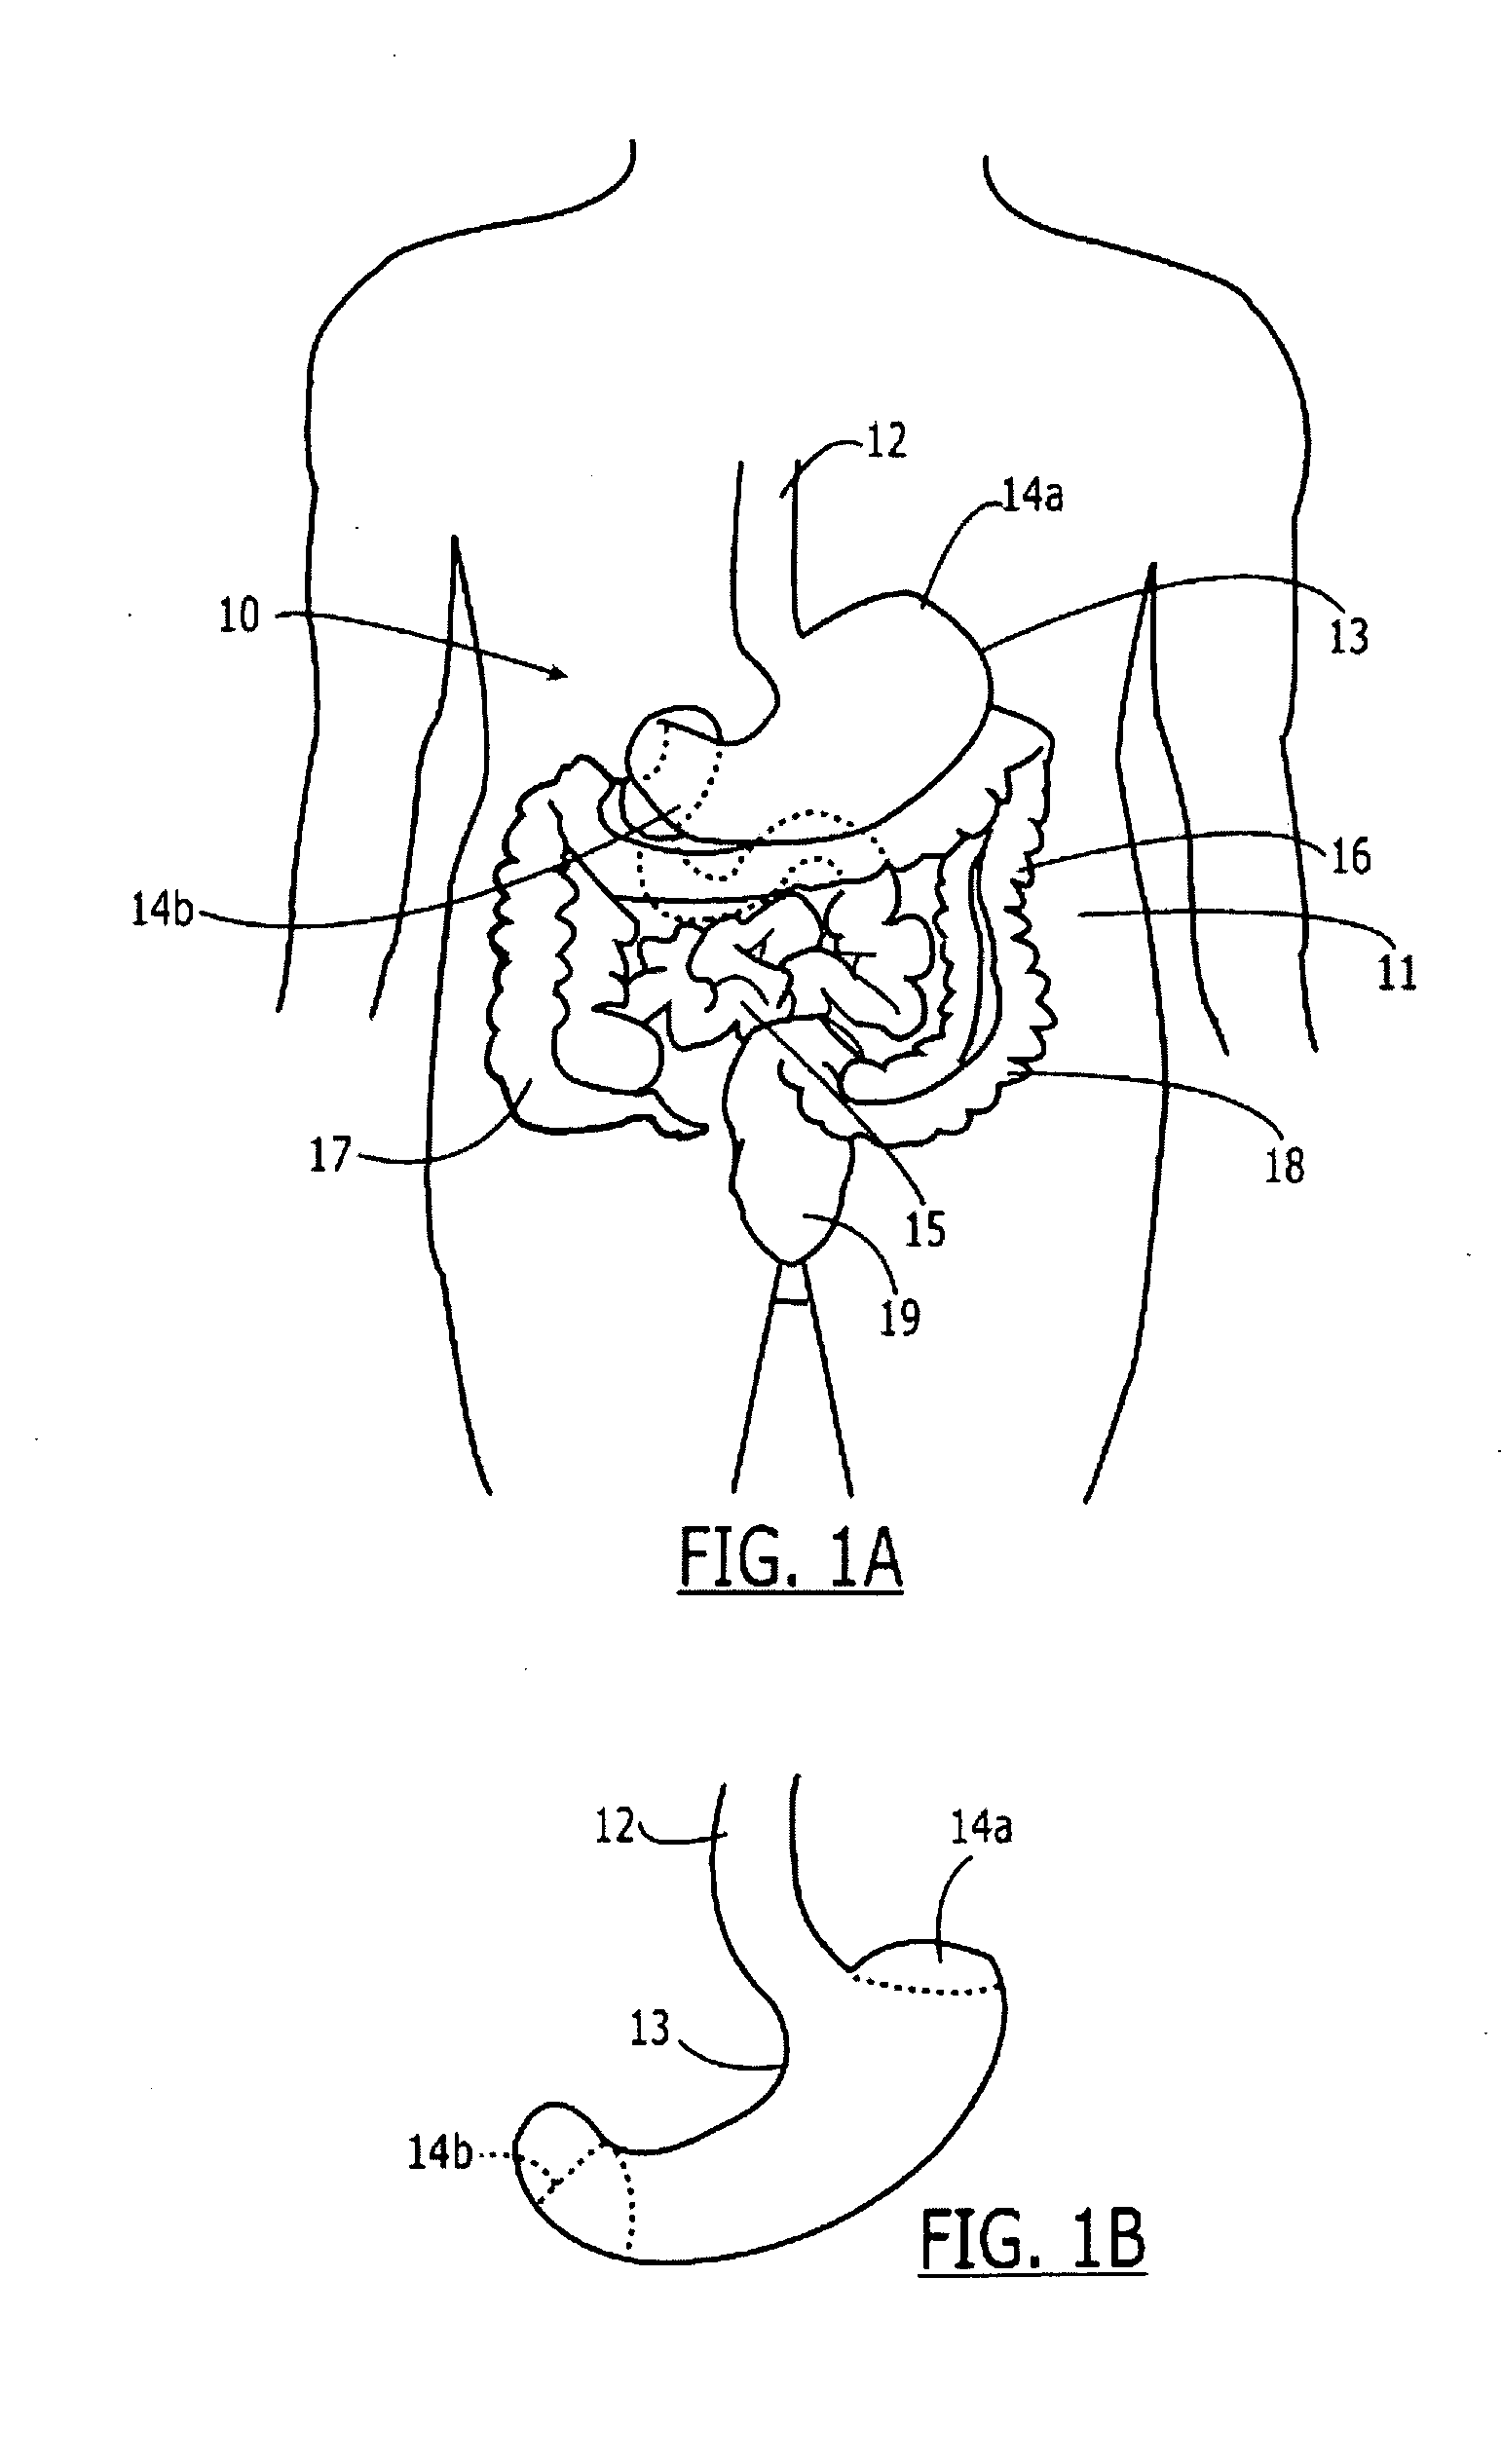 Method and System for Monitoring Gastrointestinal Function and Physiological Characteristics